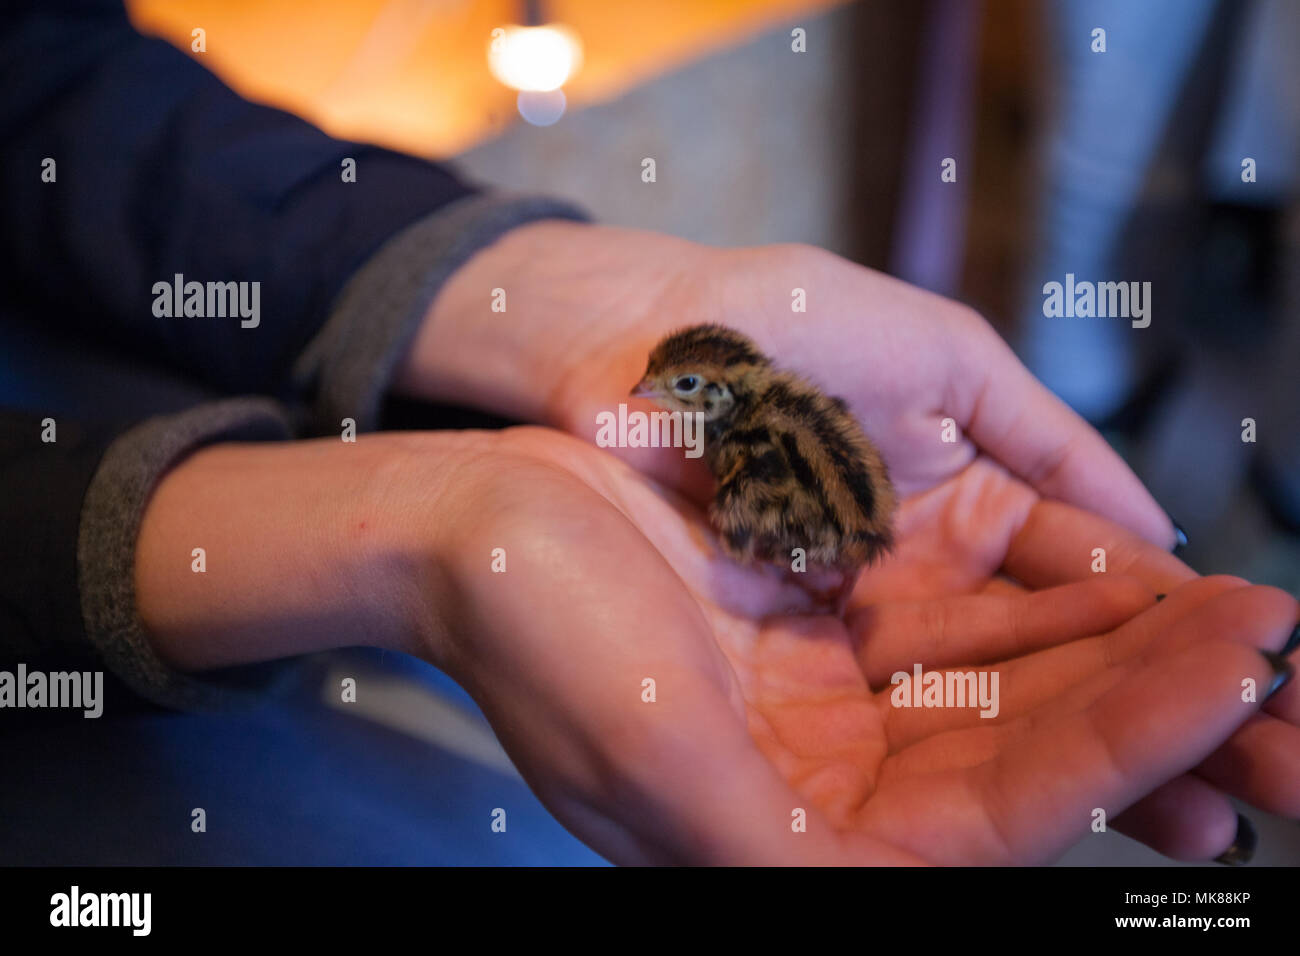 Human hands care Baby quail on a poultry farm Stock Photo